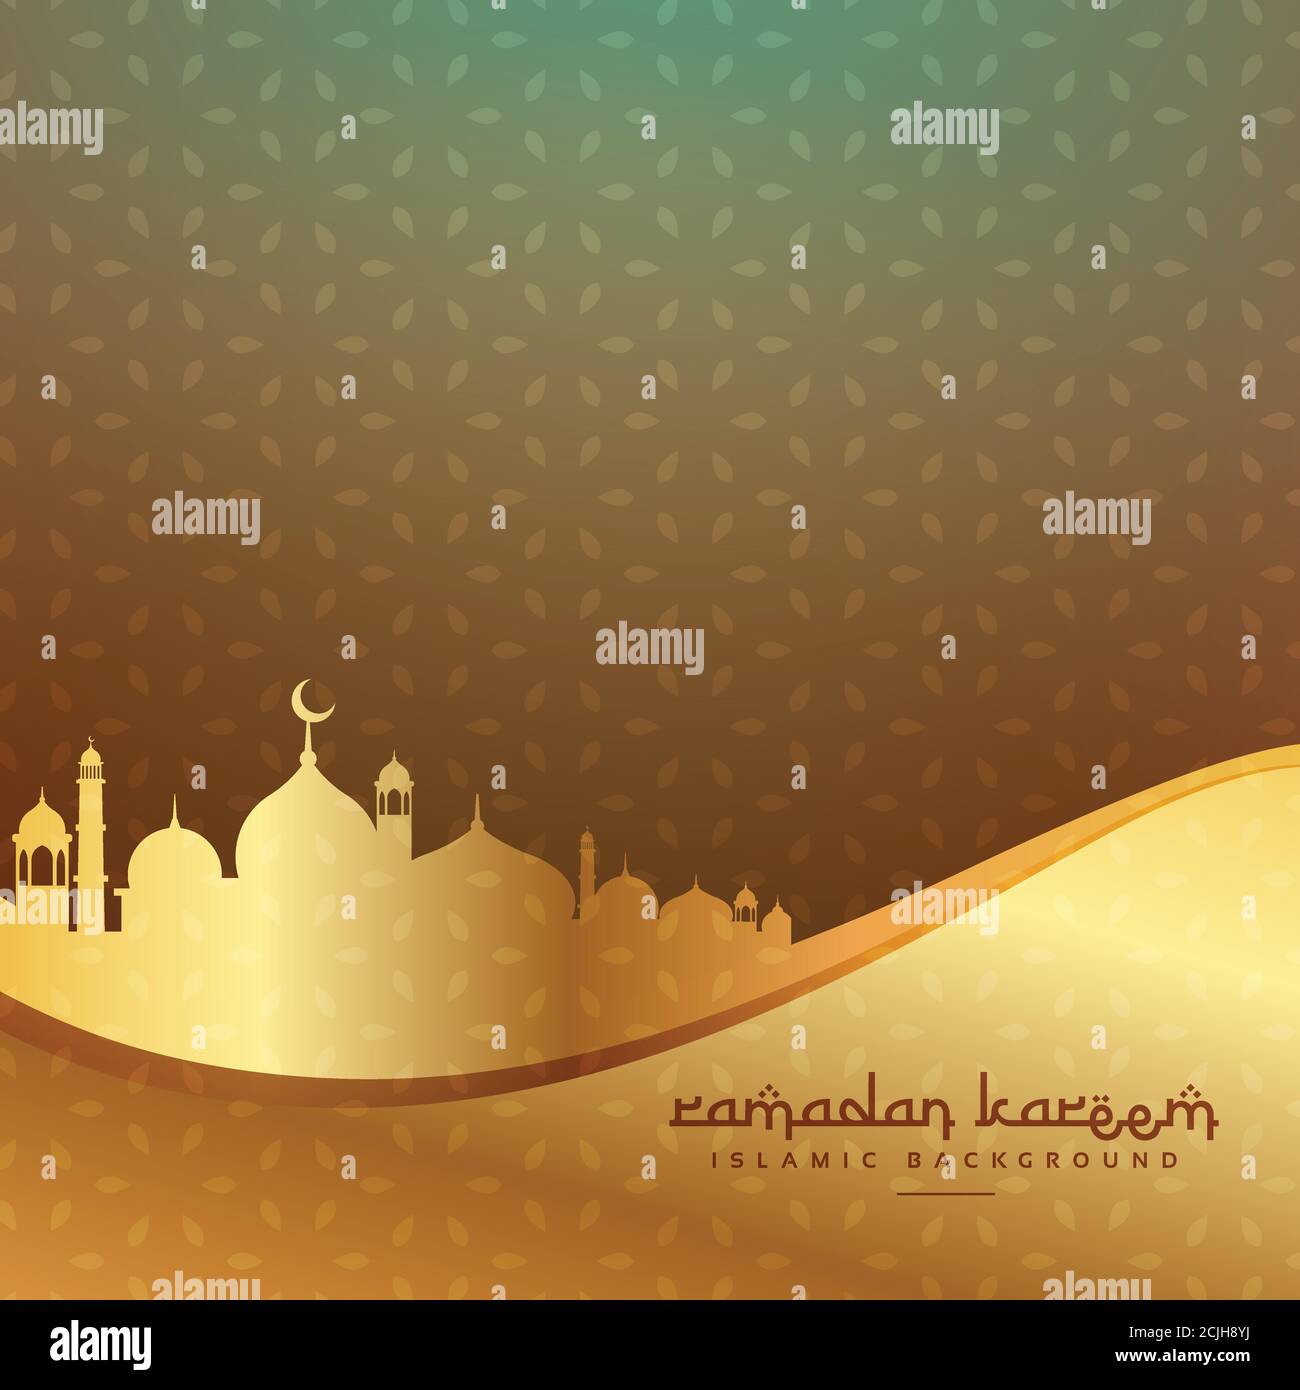 Download Background Islami Cdr Nomer 11